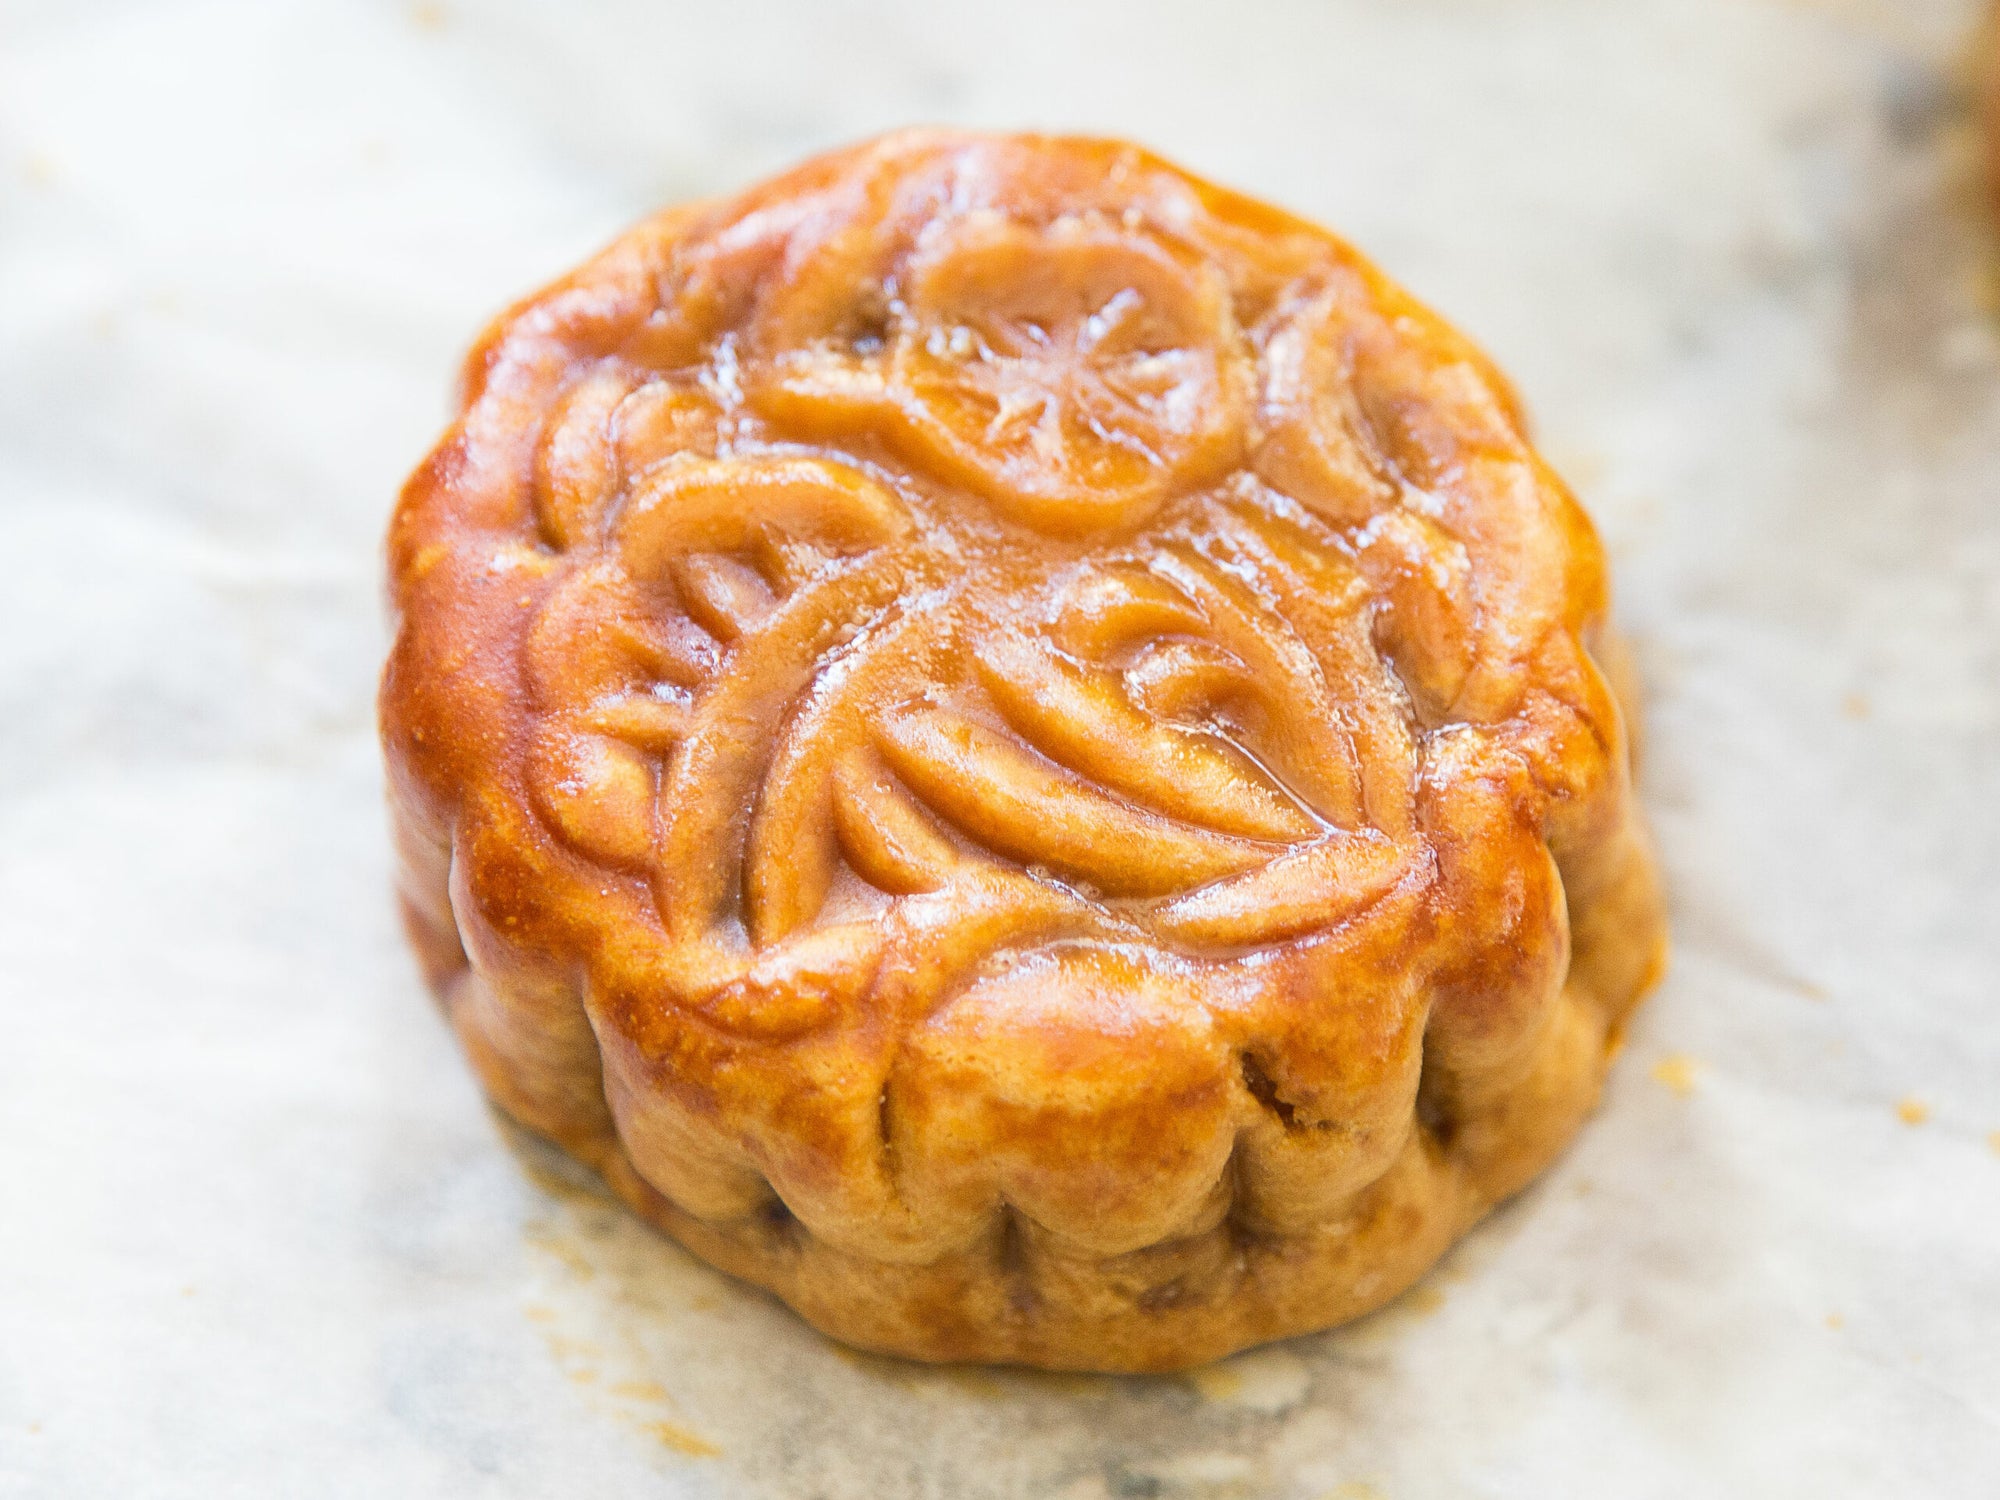 Mooncakes in a Handbag?! Social Place Creates Perfect Mooncake for